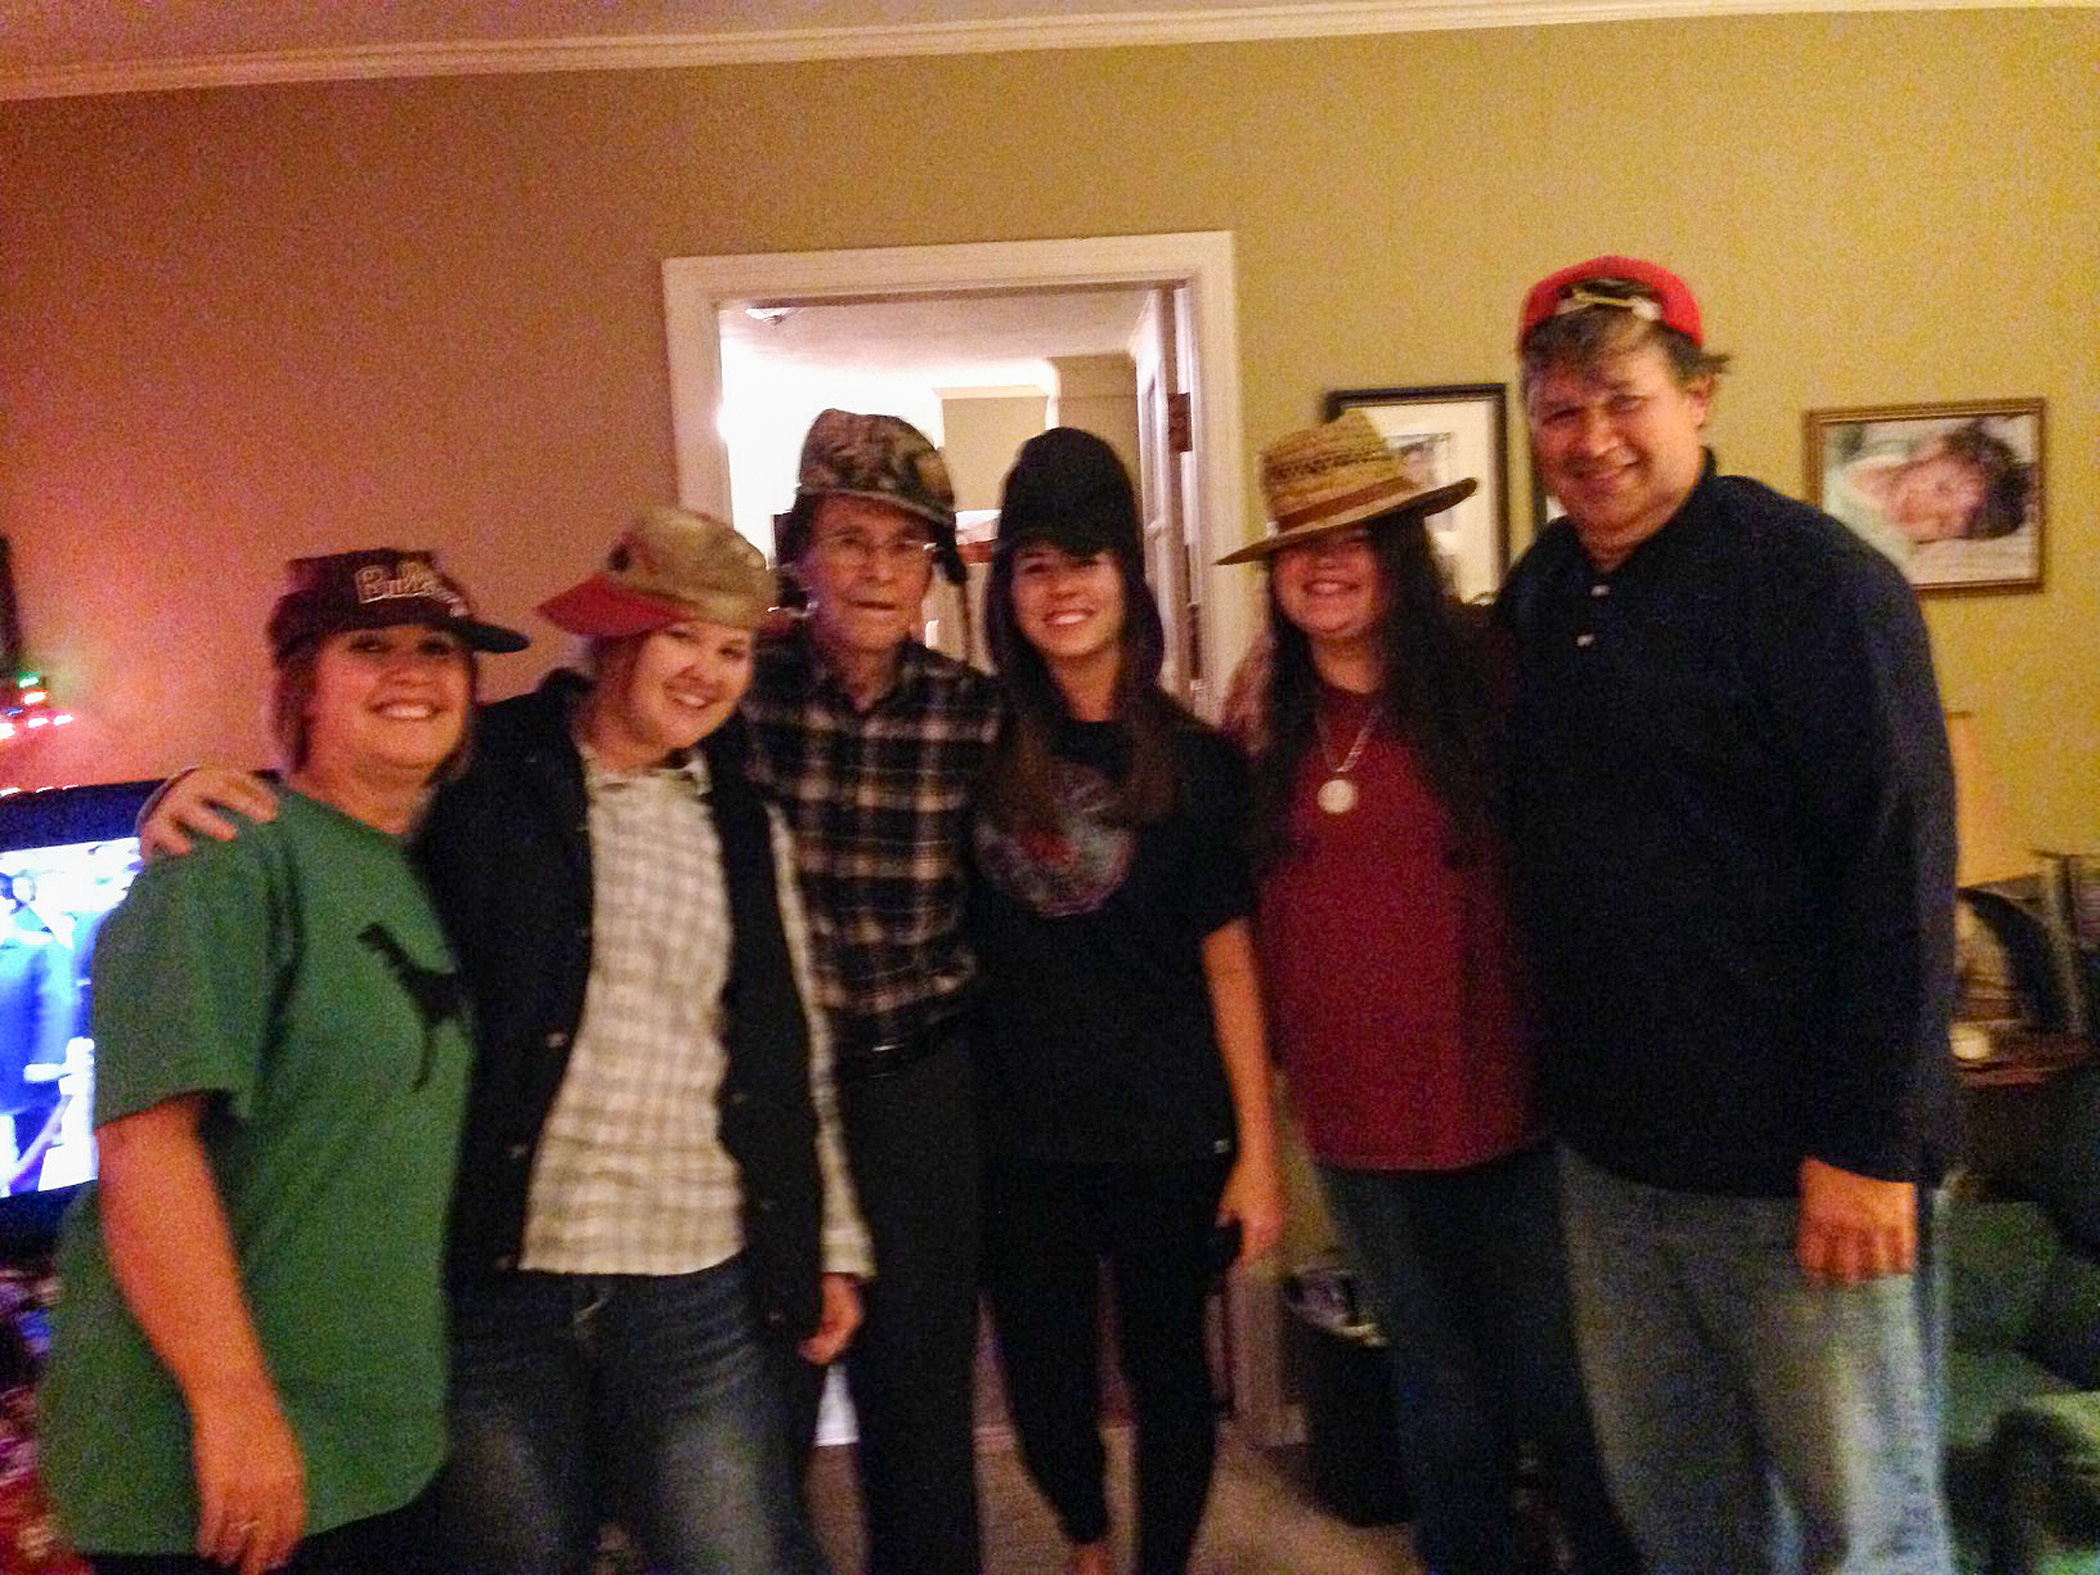 Six people posing for a picture with hats on their head.